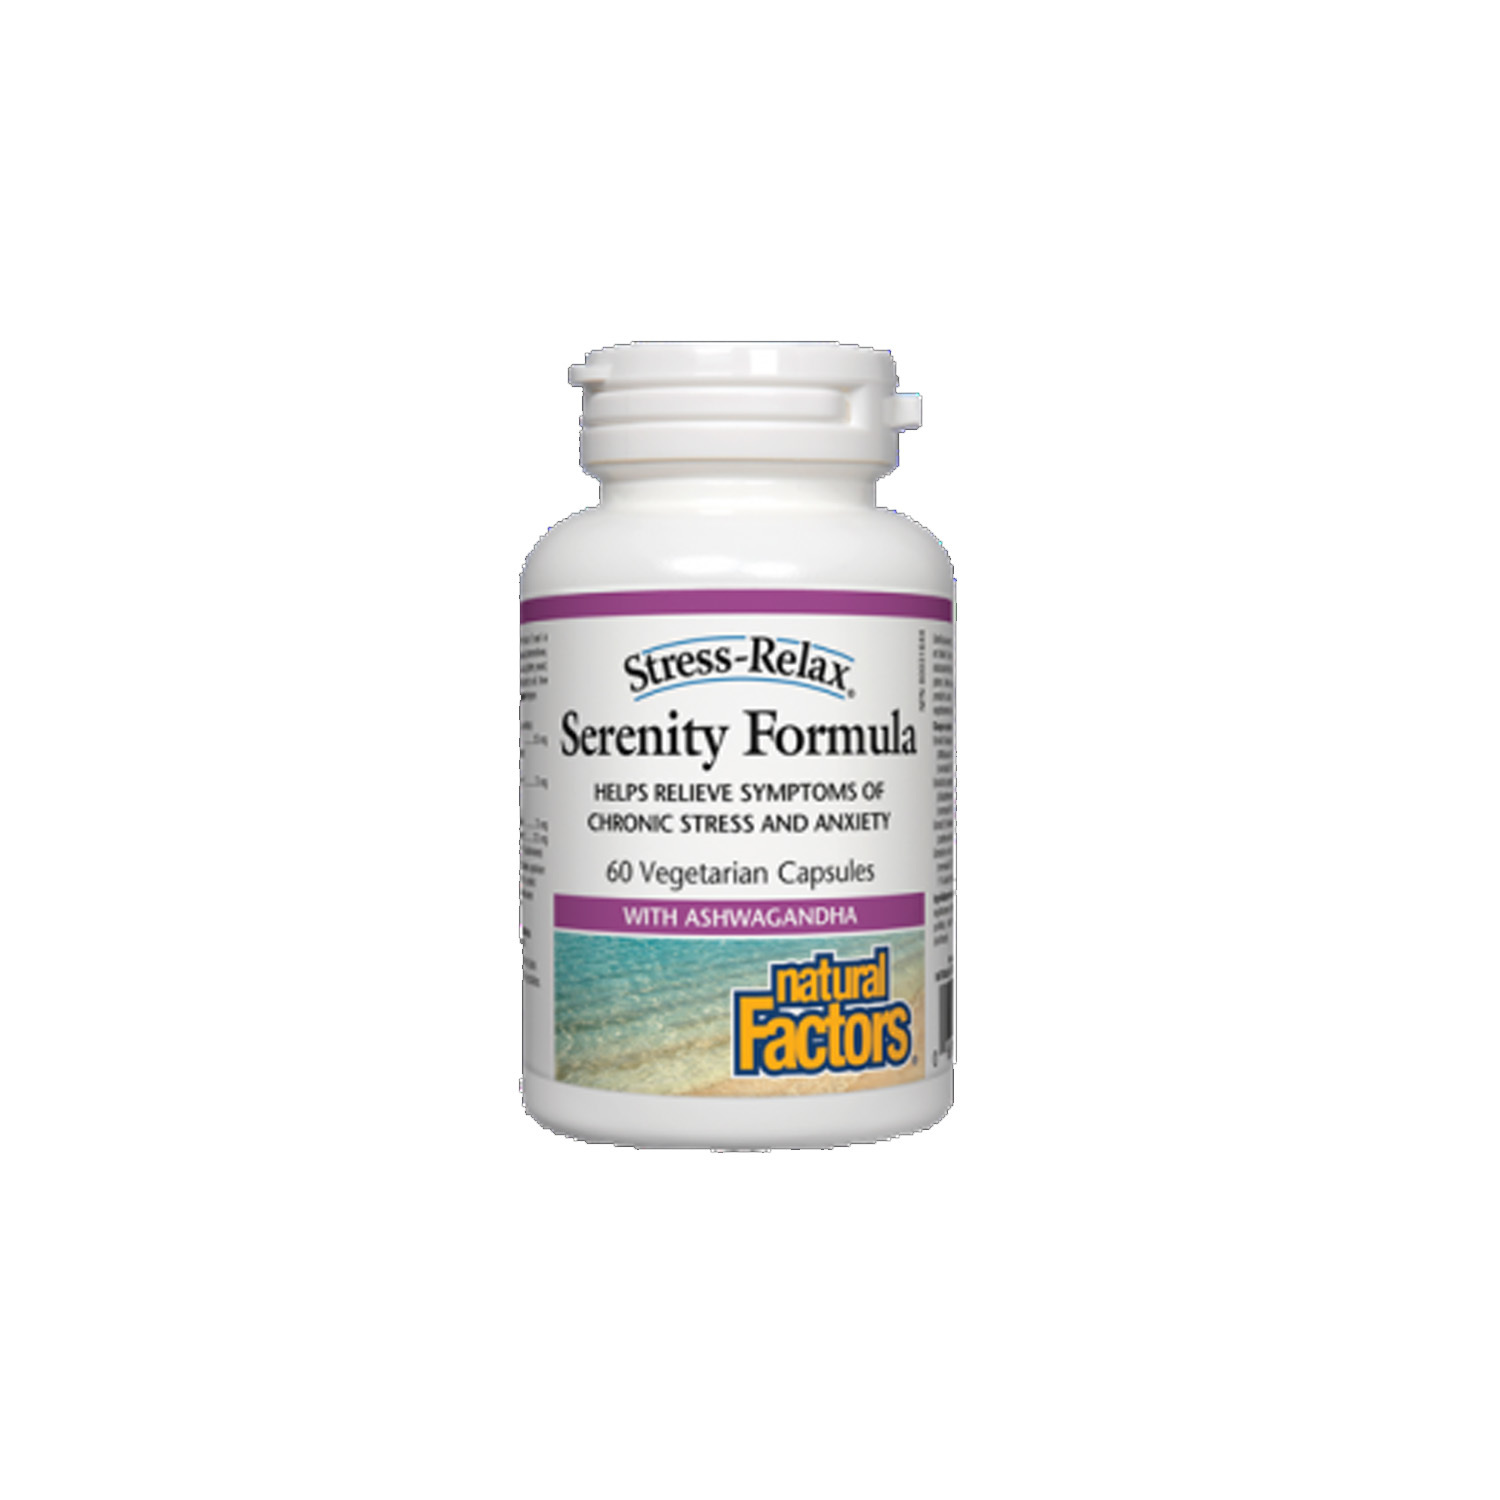 Primary image for Natural Factors Stress-Relax Serenity Formula with Sensoril, 60 Capsules